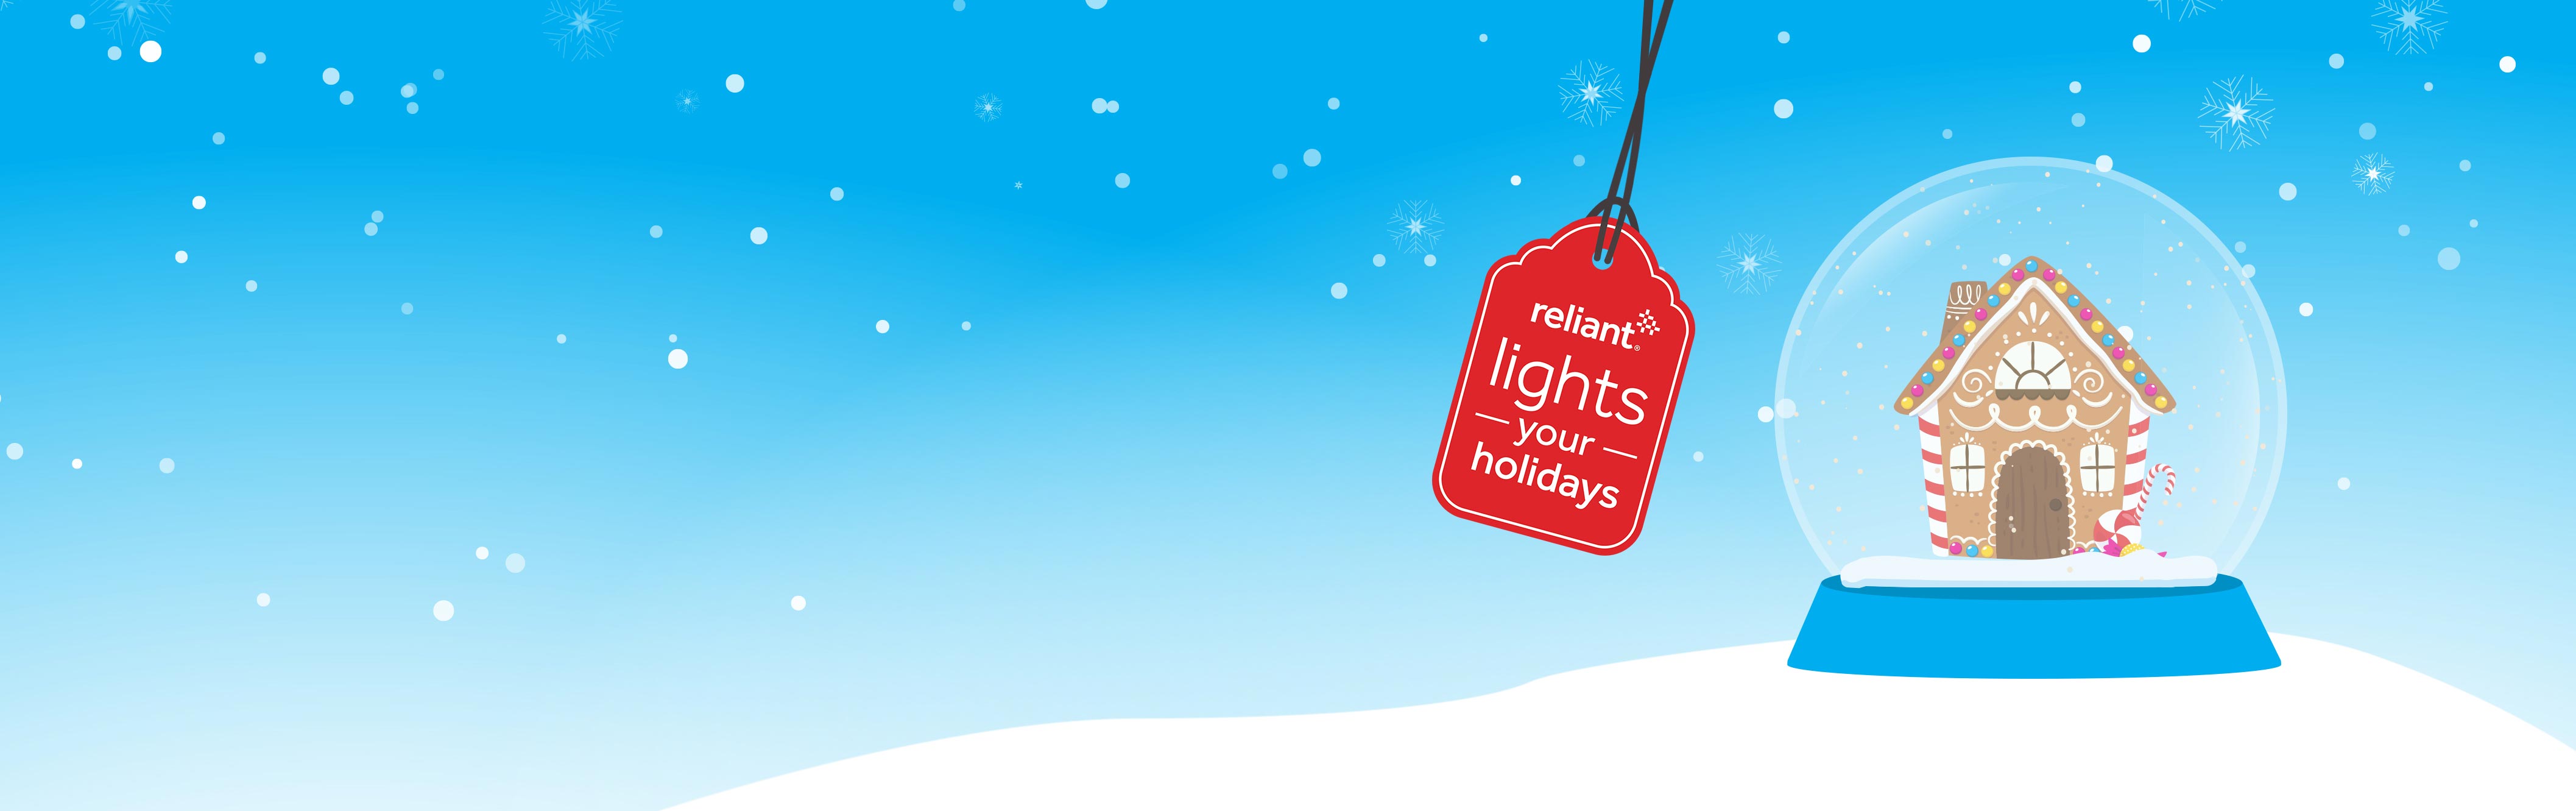 Reliant lights your holidays
